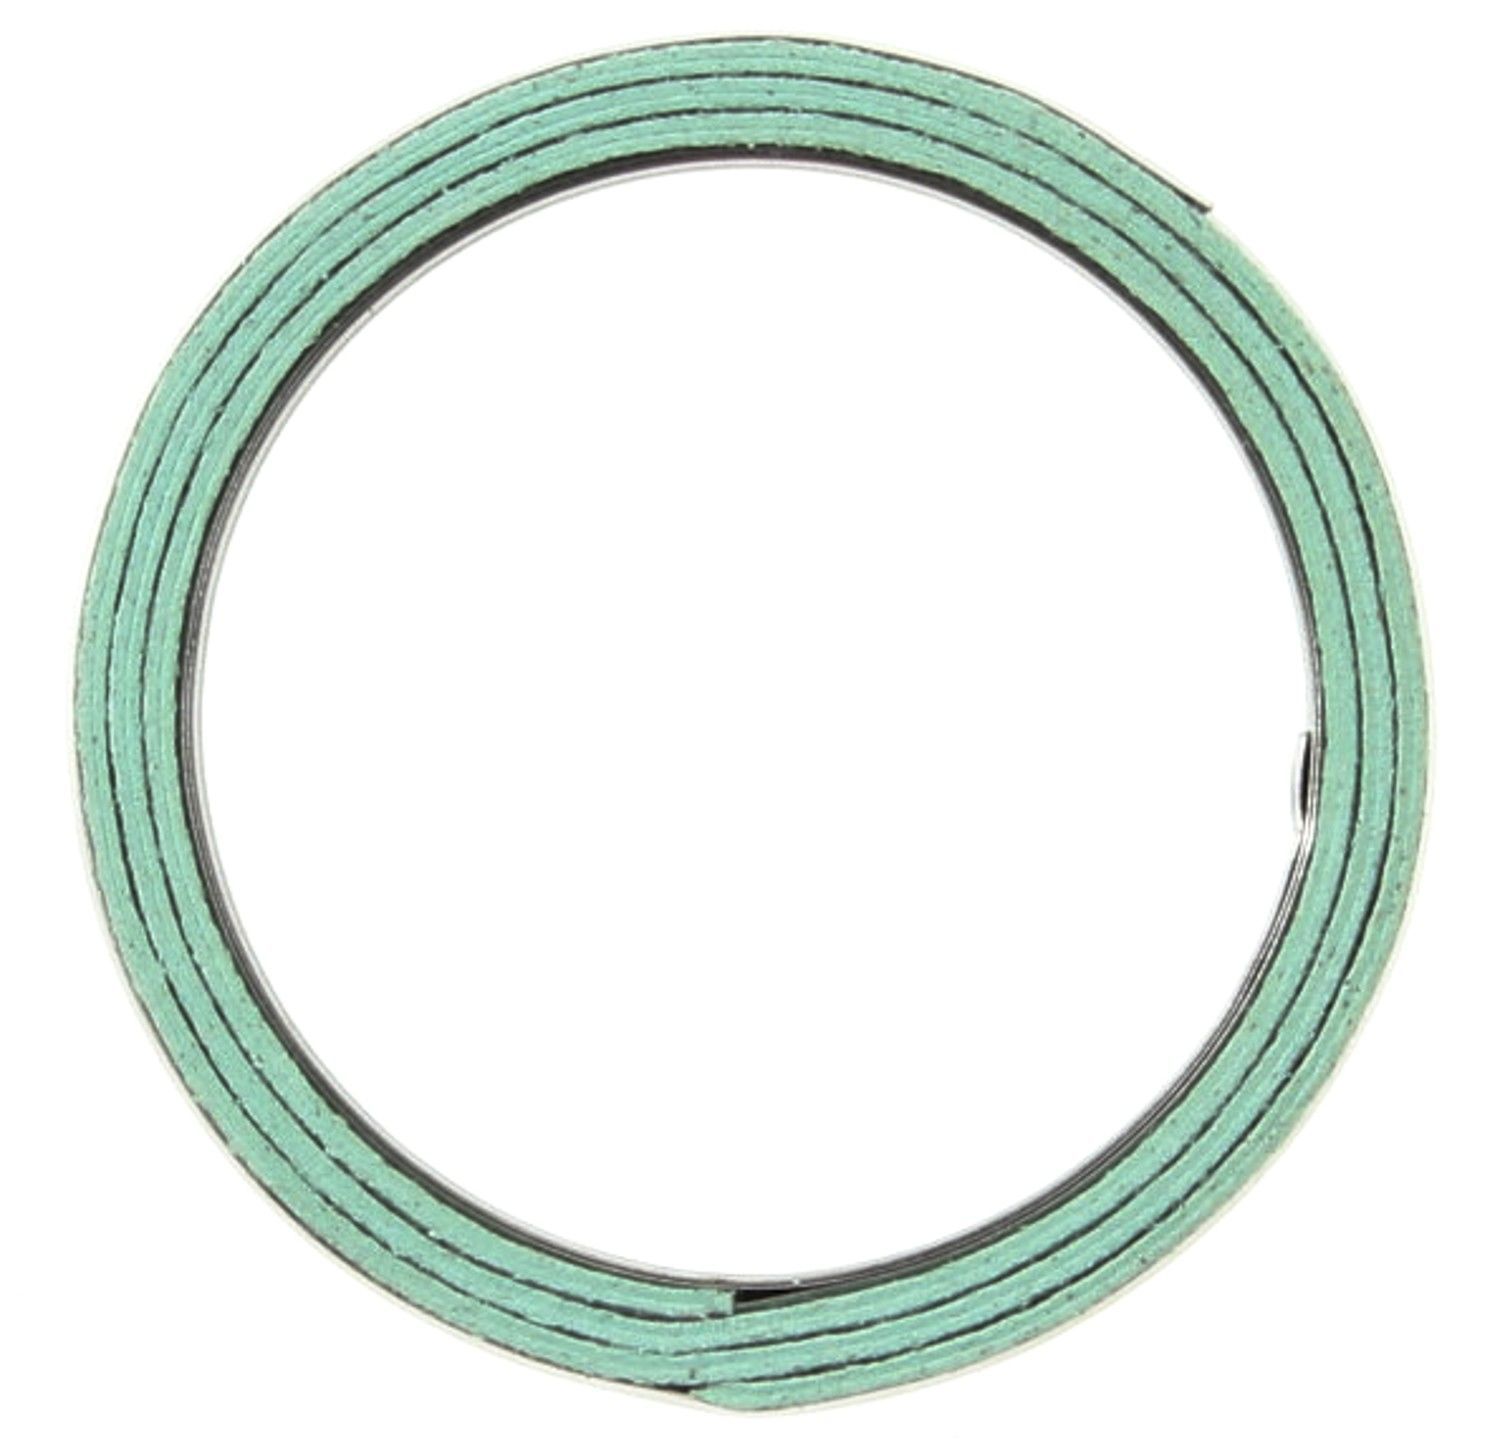 MAHLE ORIGINAL - Exhaust Pipe Flange Gasket - MHL F7493